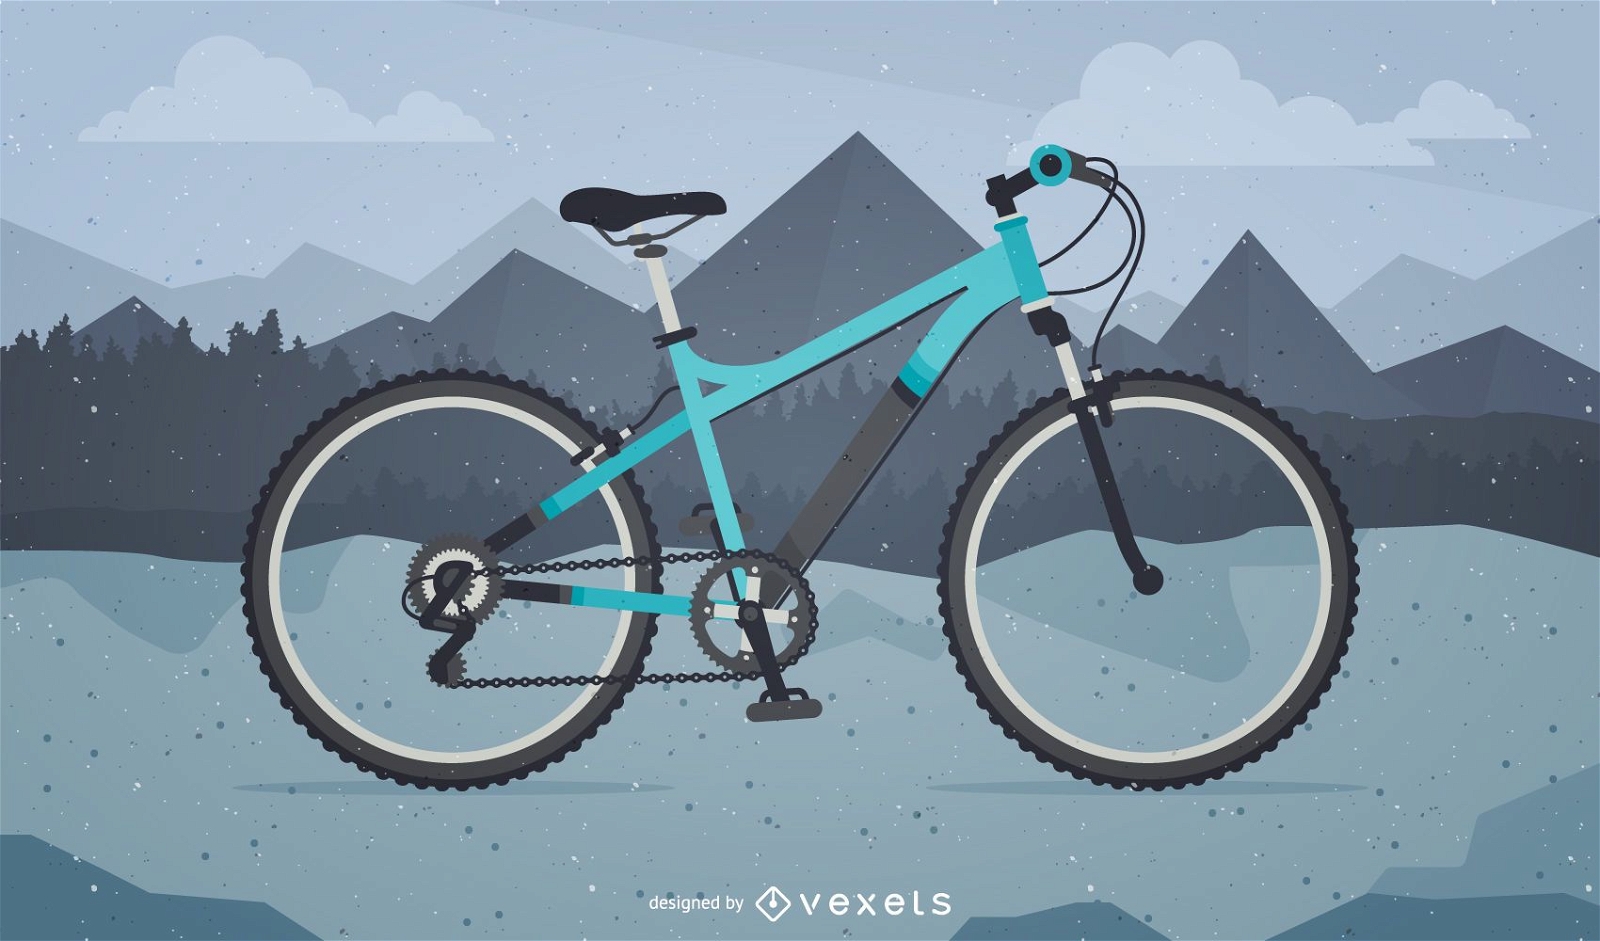 Bicycle illustration on mountains